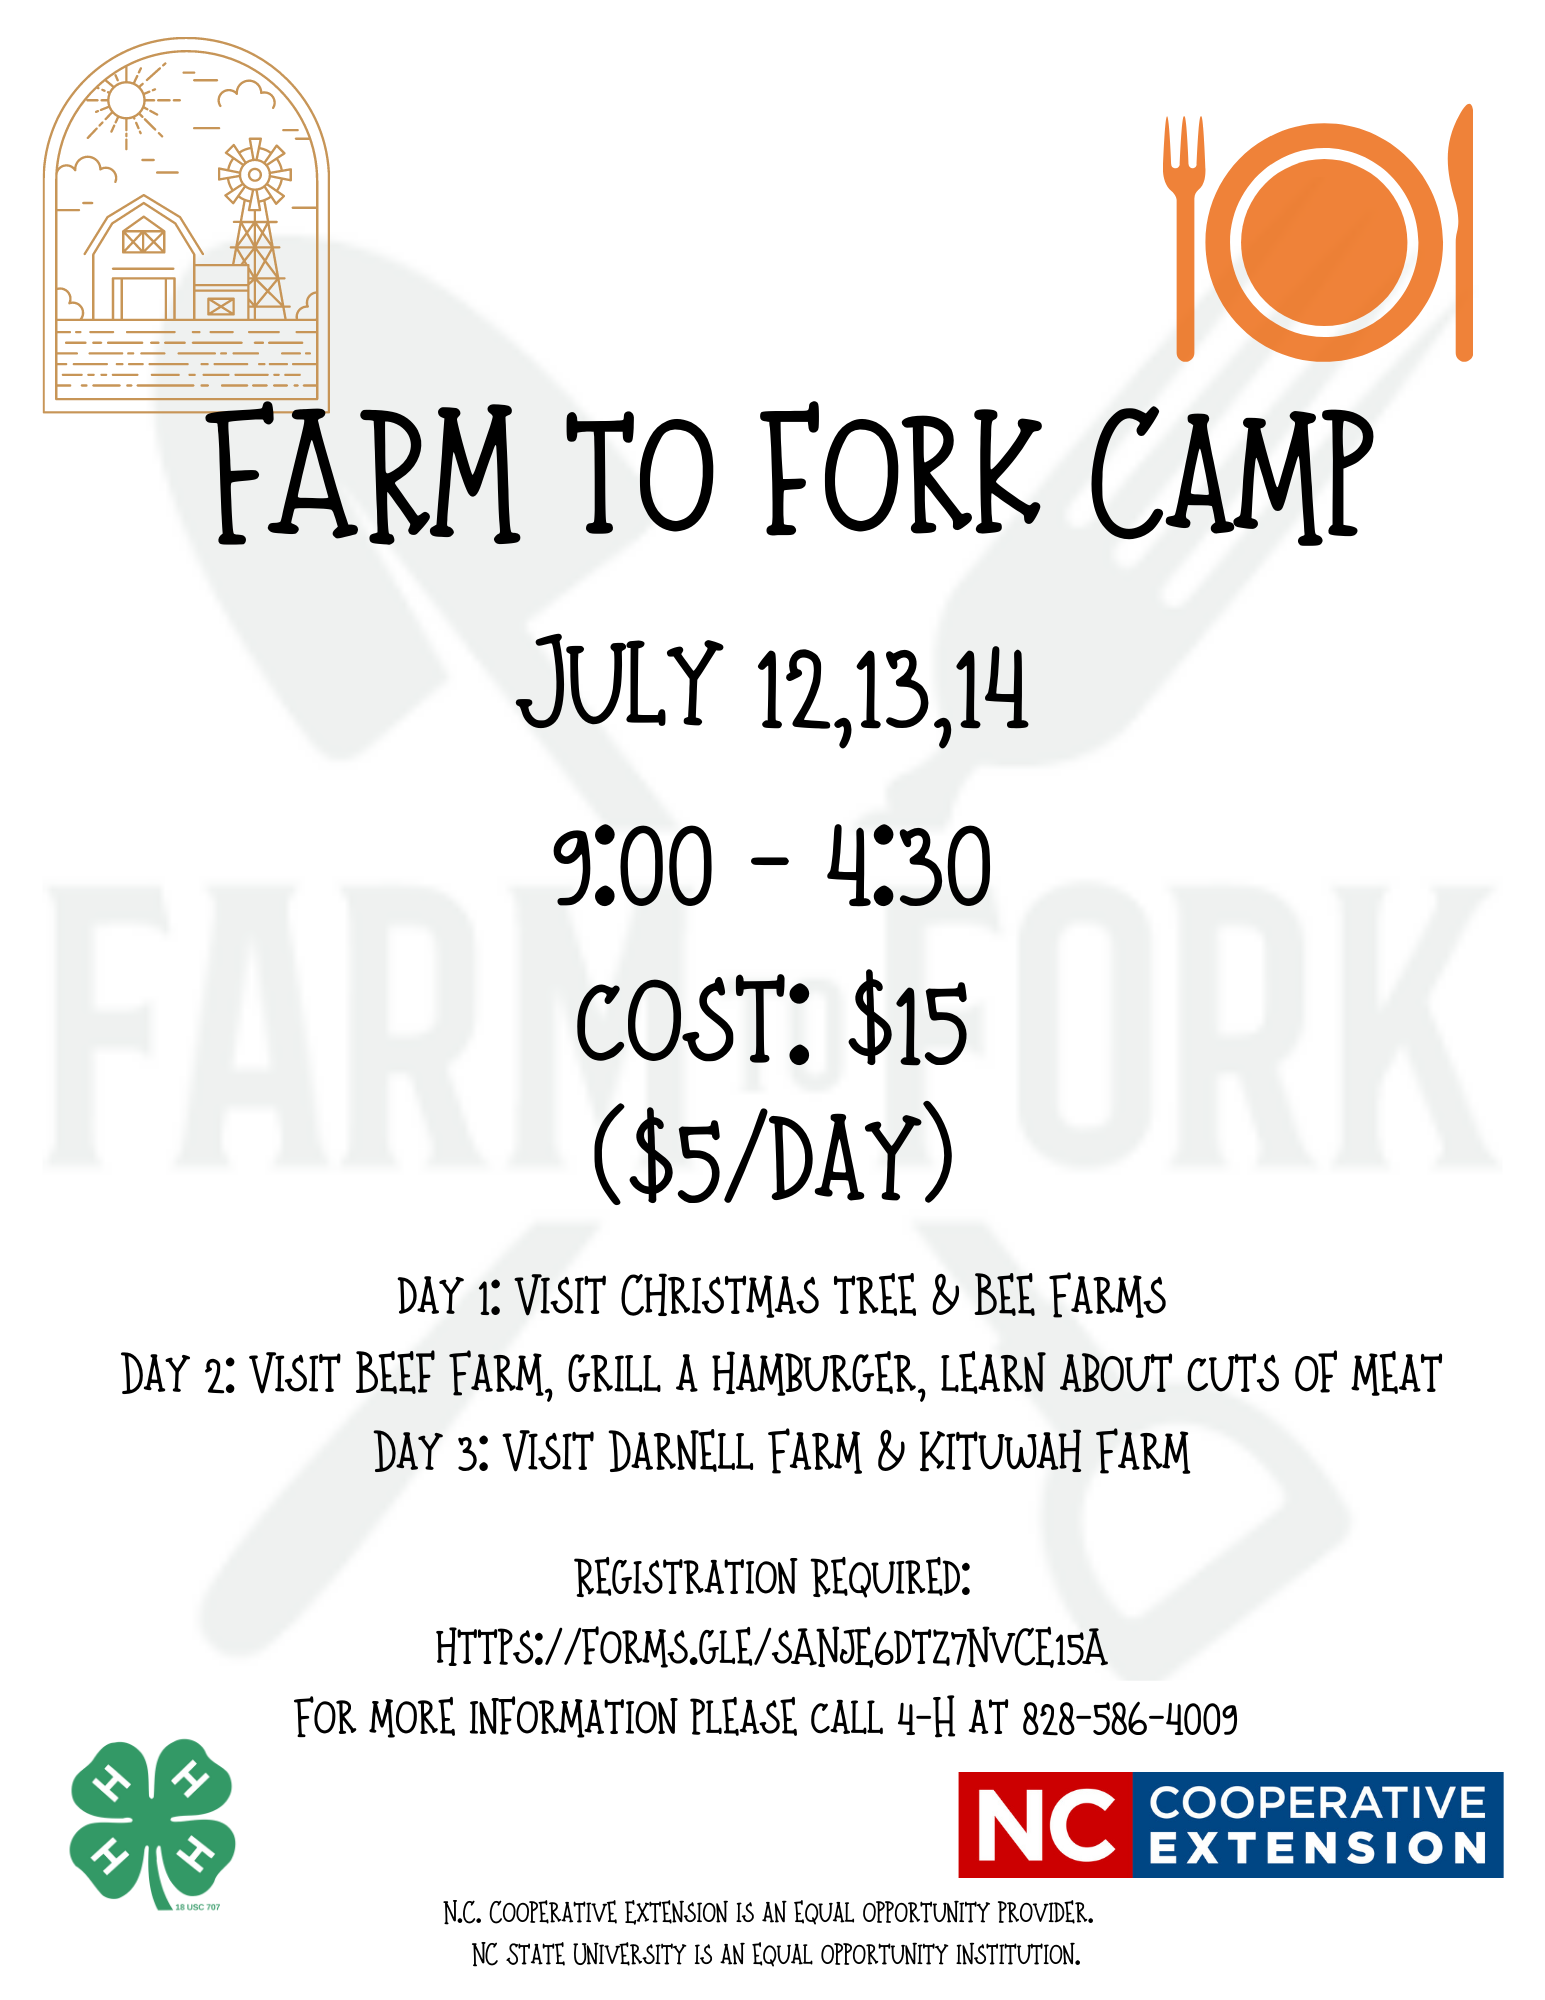 Farm to Fork Camp Flyer.